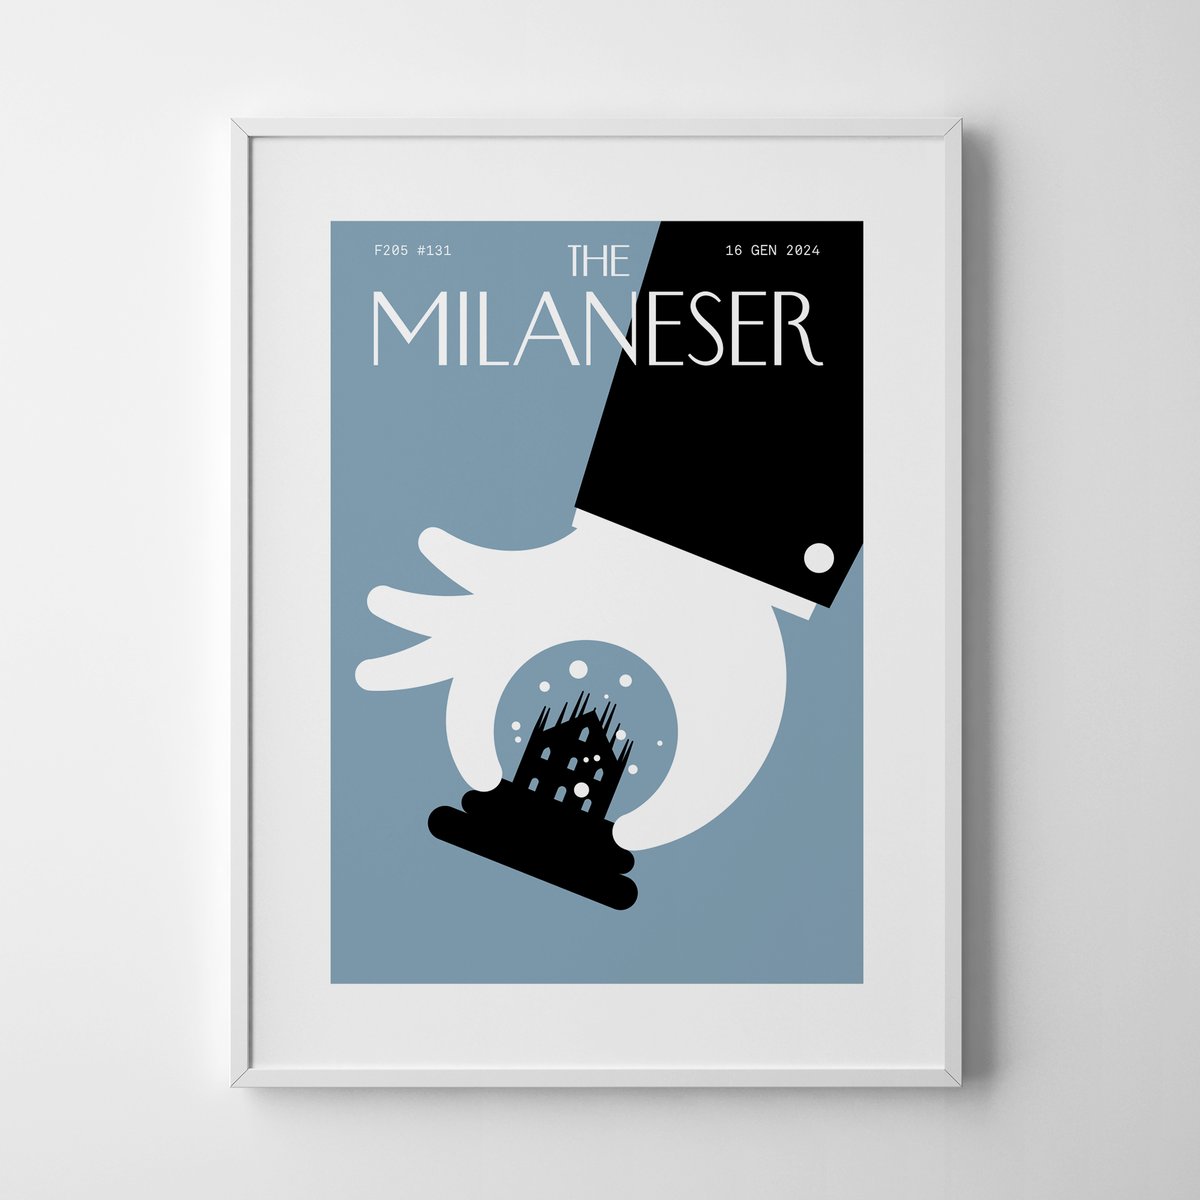 Products | The Milaneser Shop